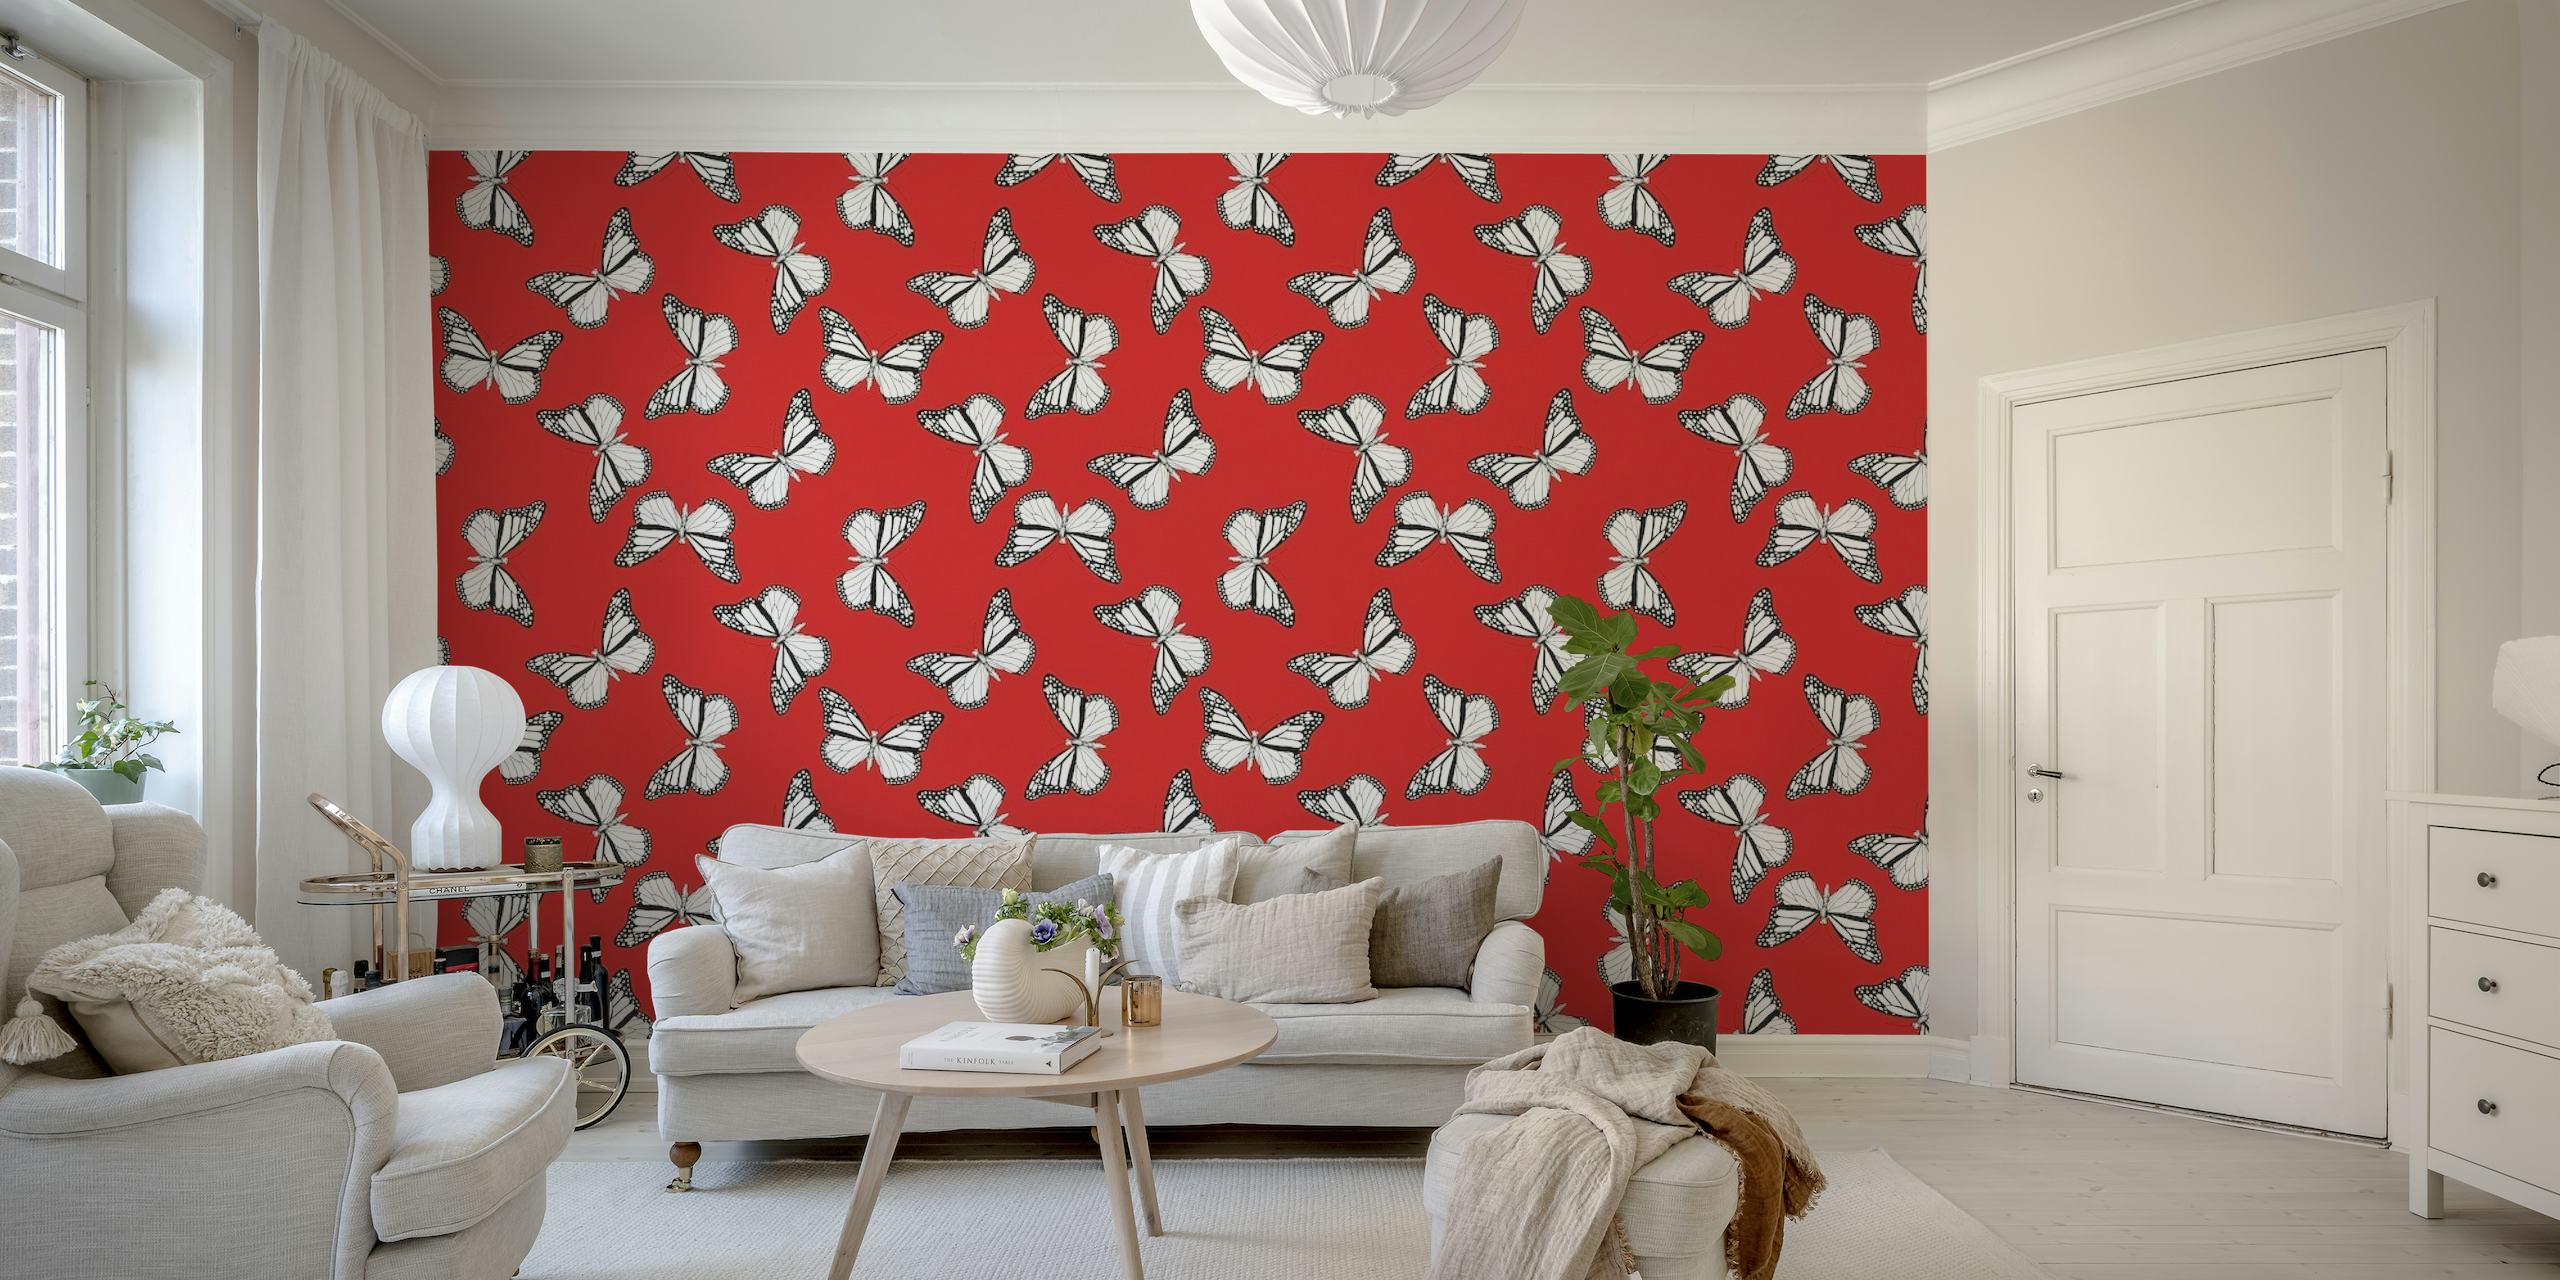 Red wall mural featuring a repetitive pattern of Monarch butterflies in orange and white